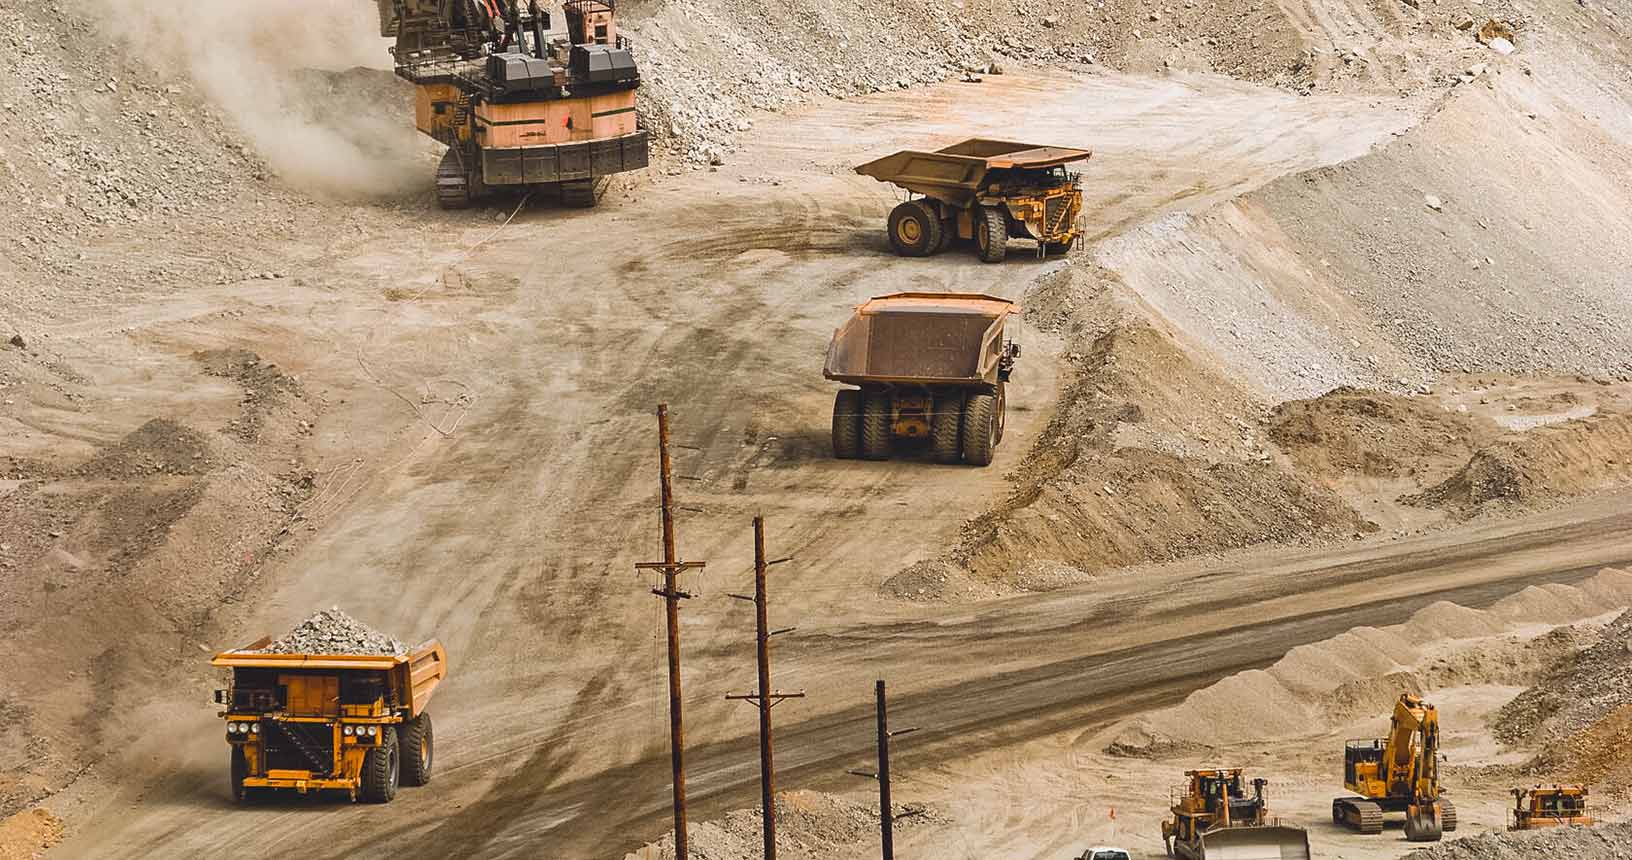 haul trucks and excavators in an open pit mine